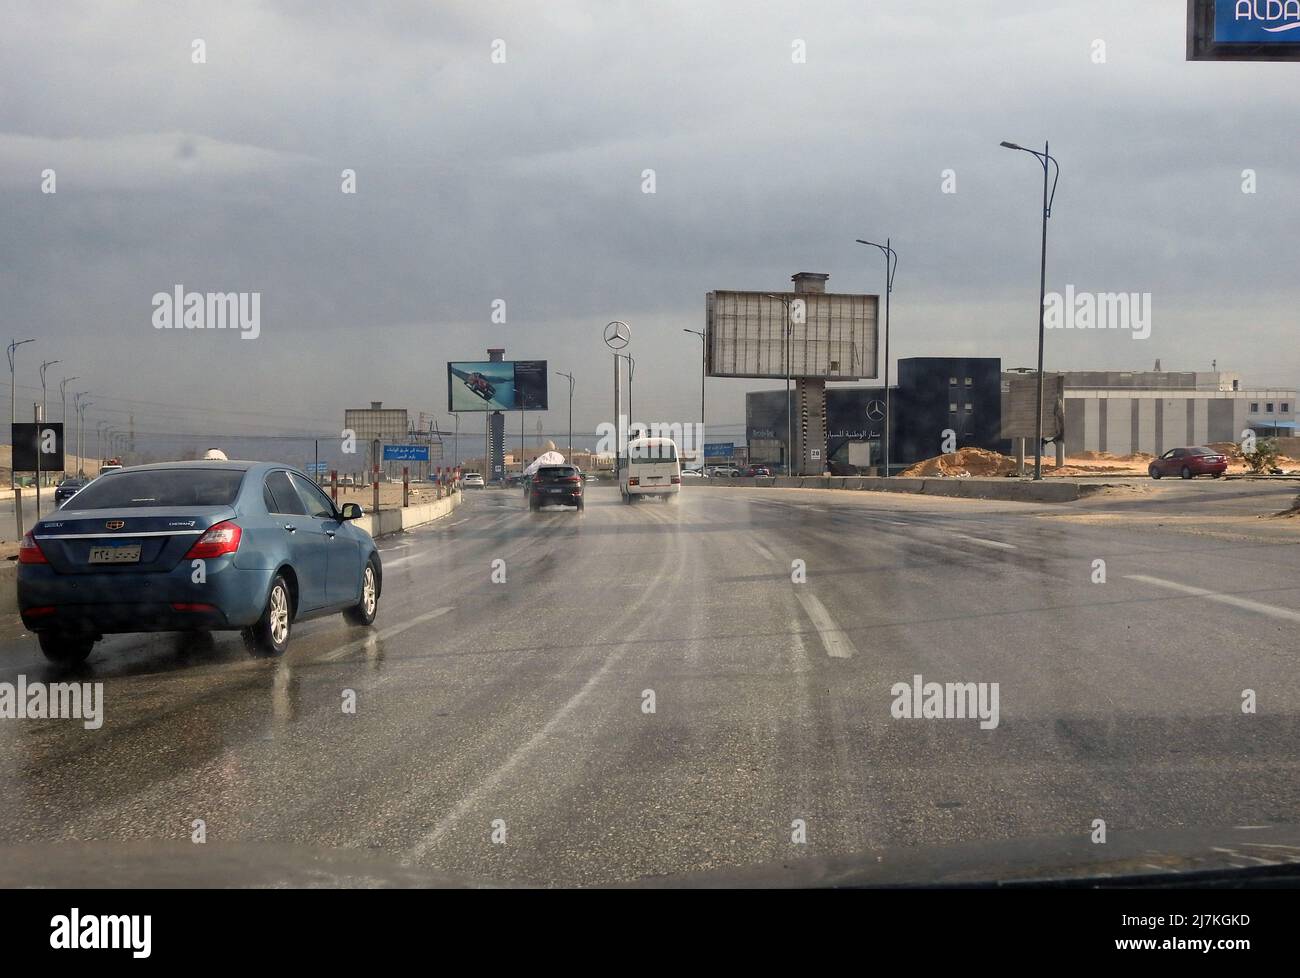 Giza, Egypt, December 30 2021: raining weather, traffic on a cloudy day bad weather condition during rains, road view through car window blurry with h Stock Photo